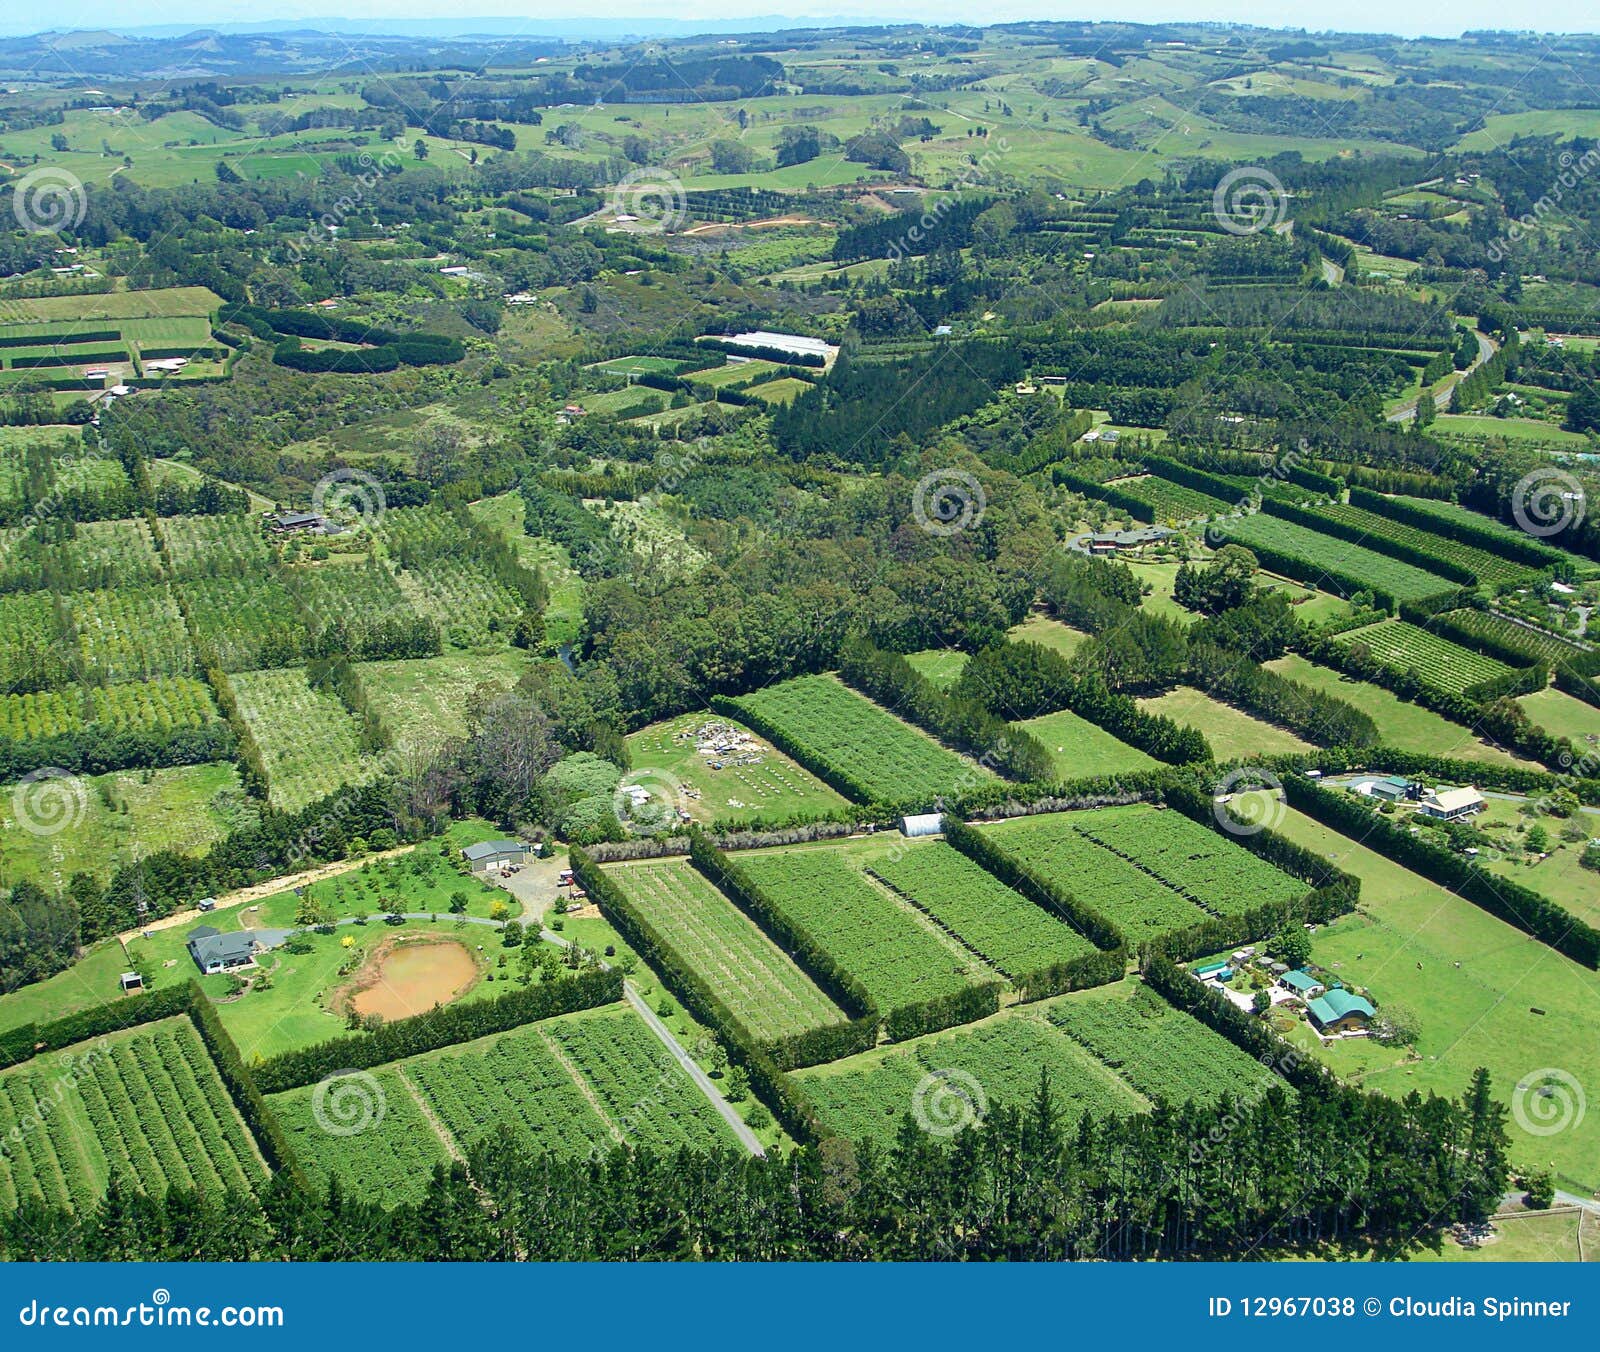 aerial view of vineyards and rural farms